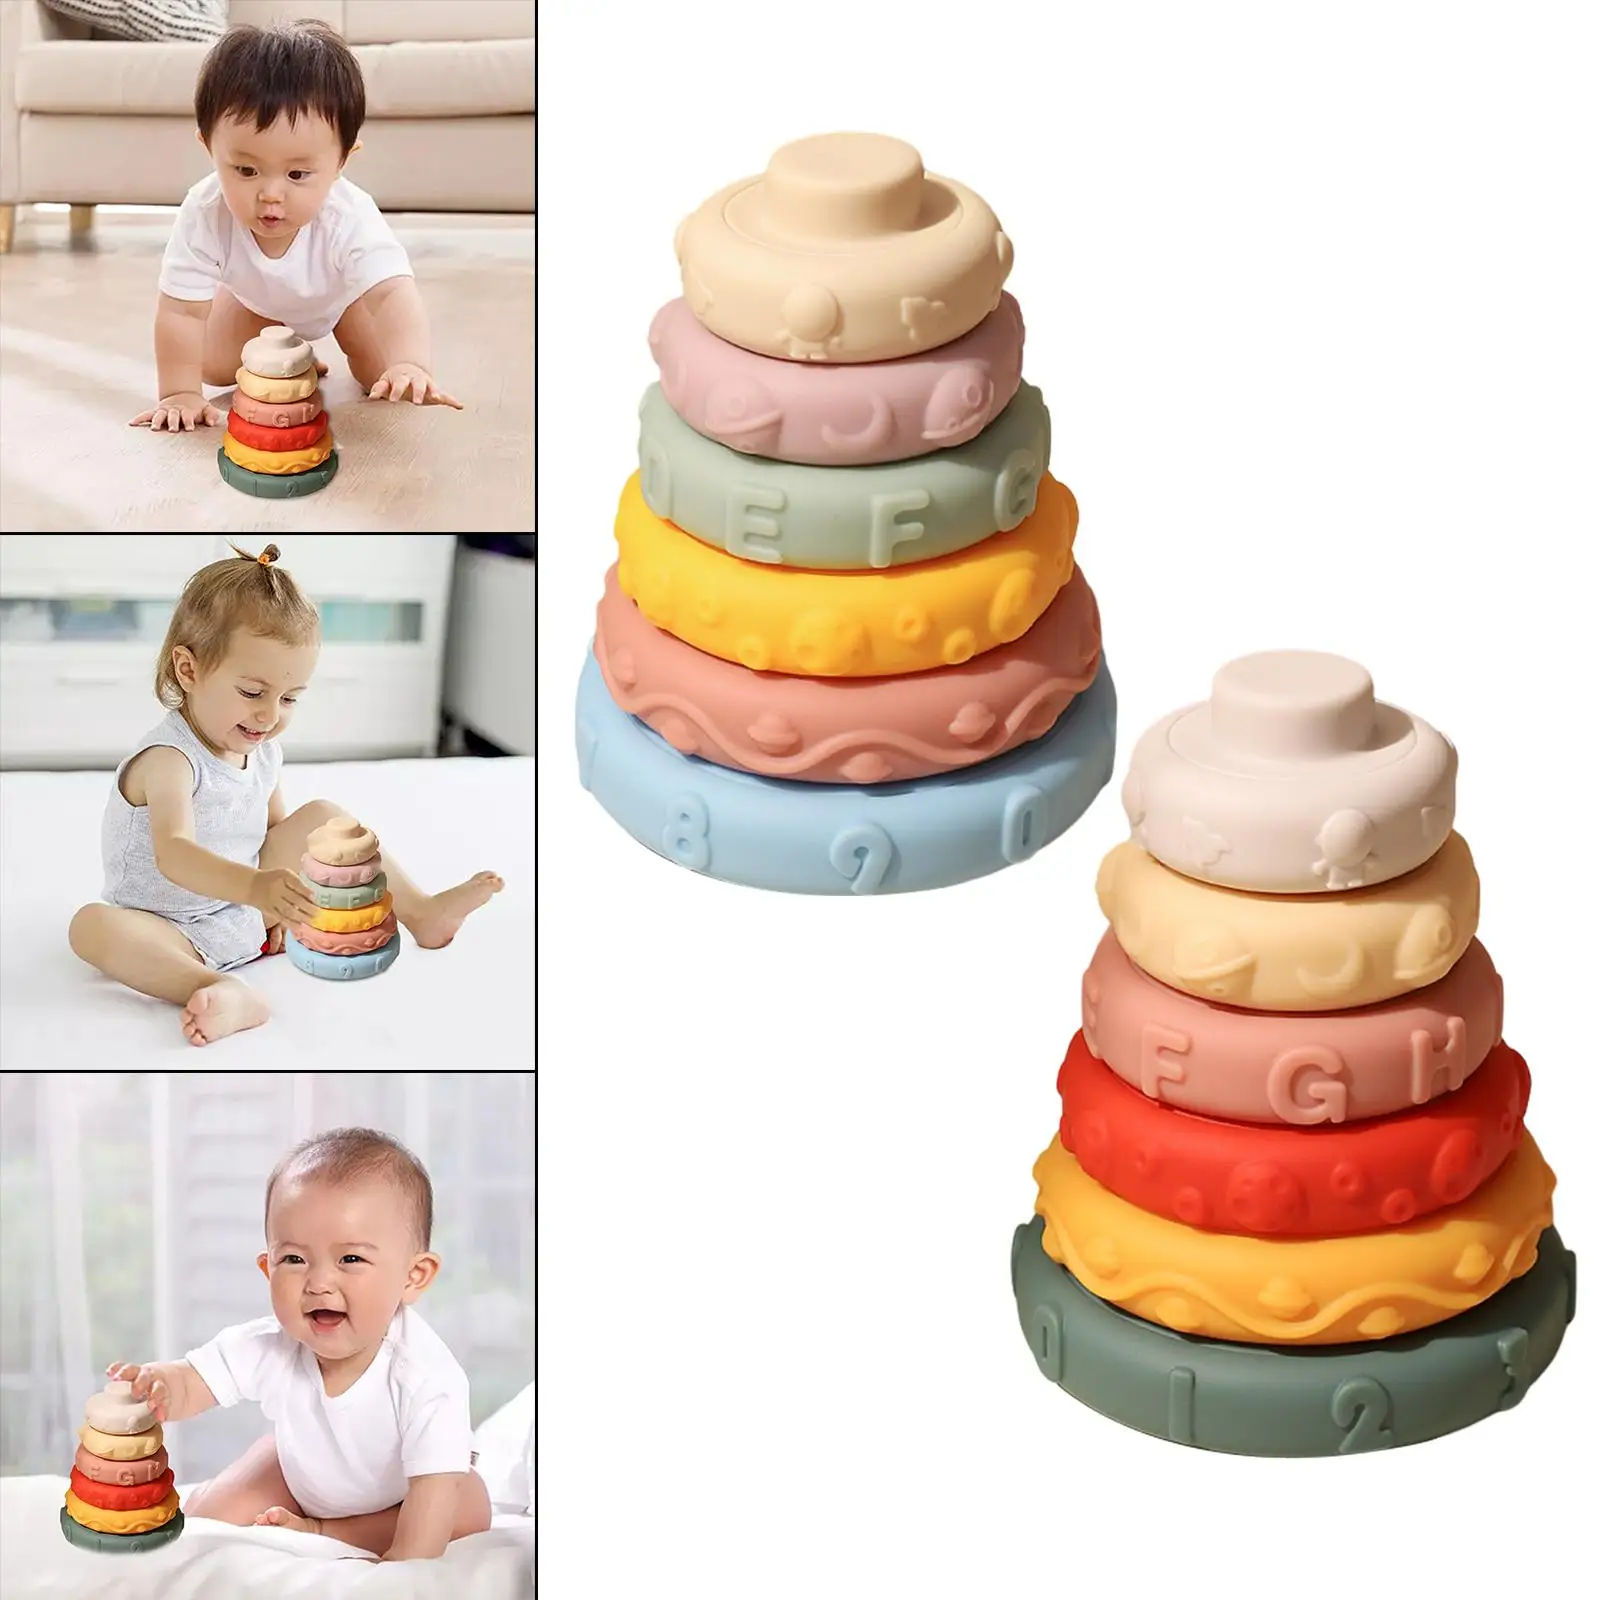 Soft Stacking Nesting Toys Stacker Imagination Stacking Game Kids Stacking Toy for Toddler